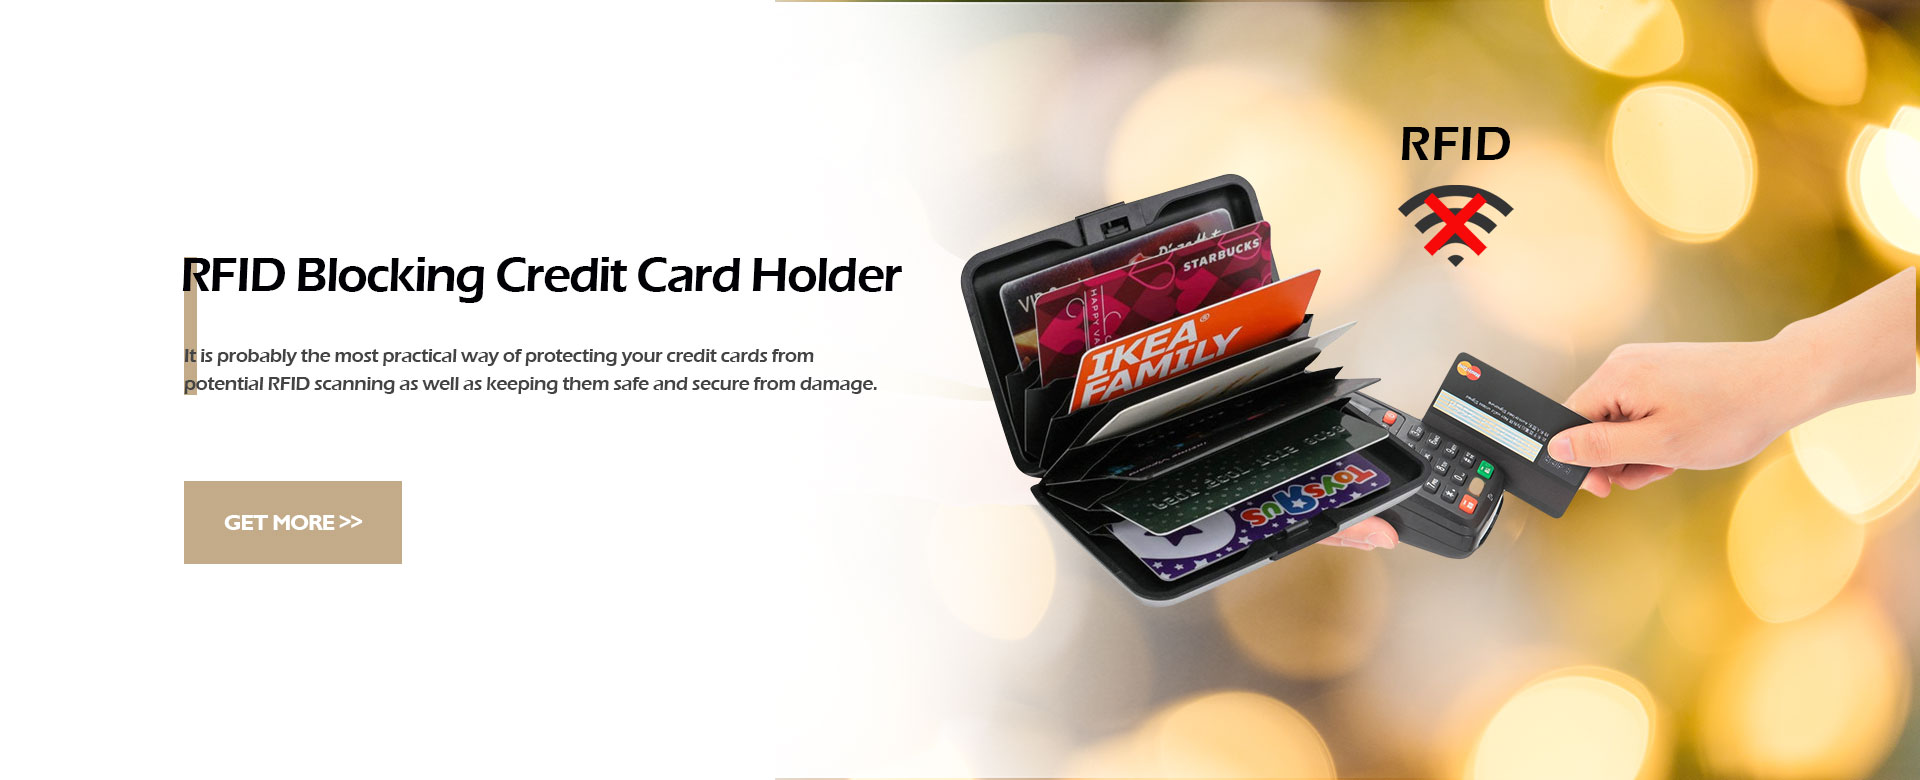 RFID Wallet Manufacturers le Suppliers